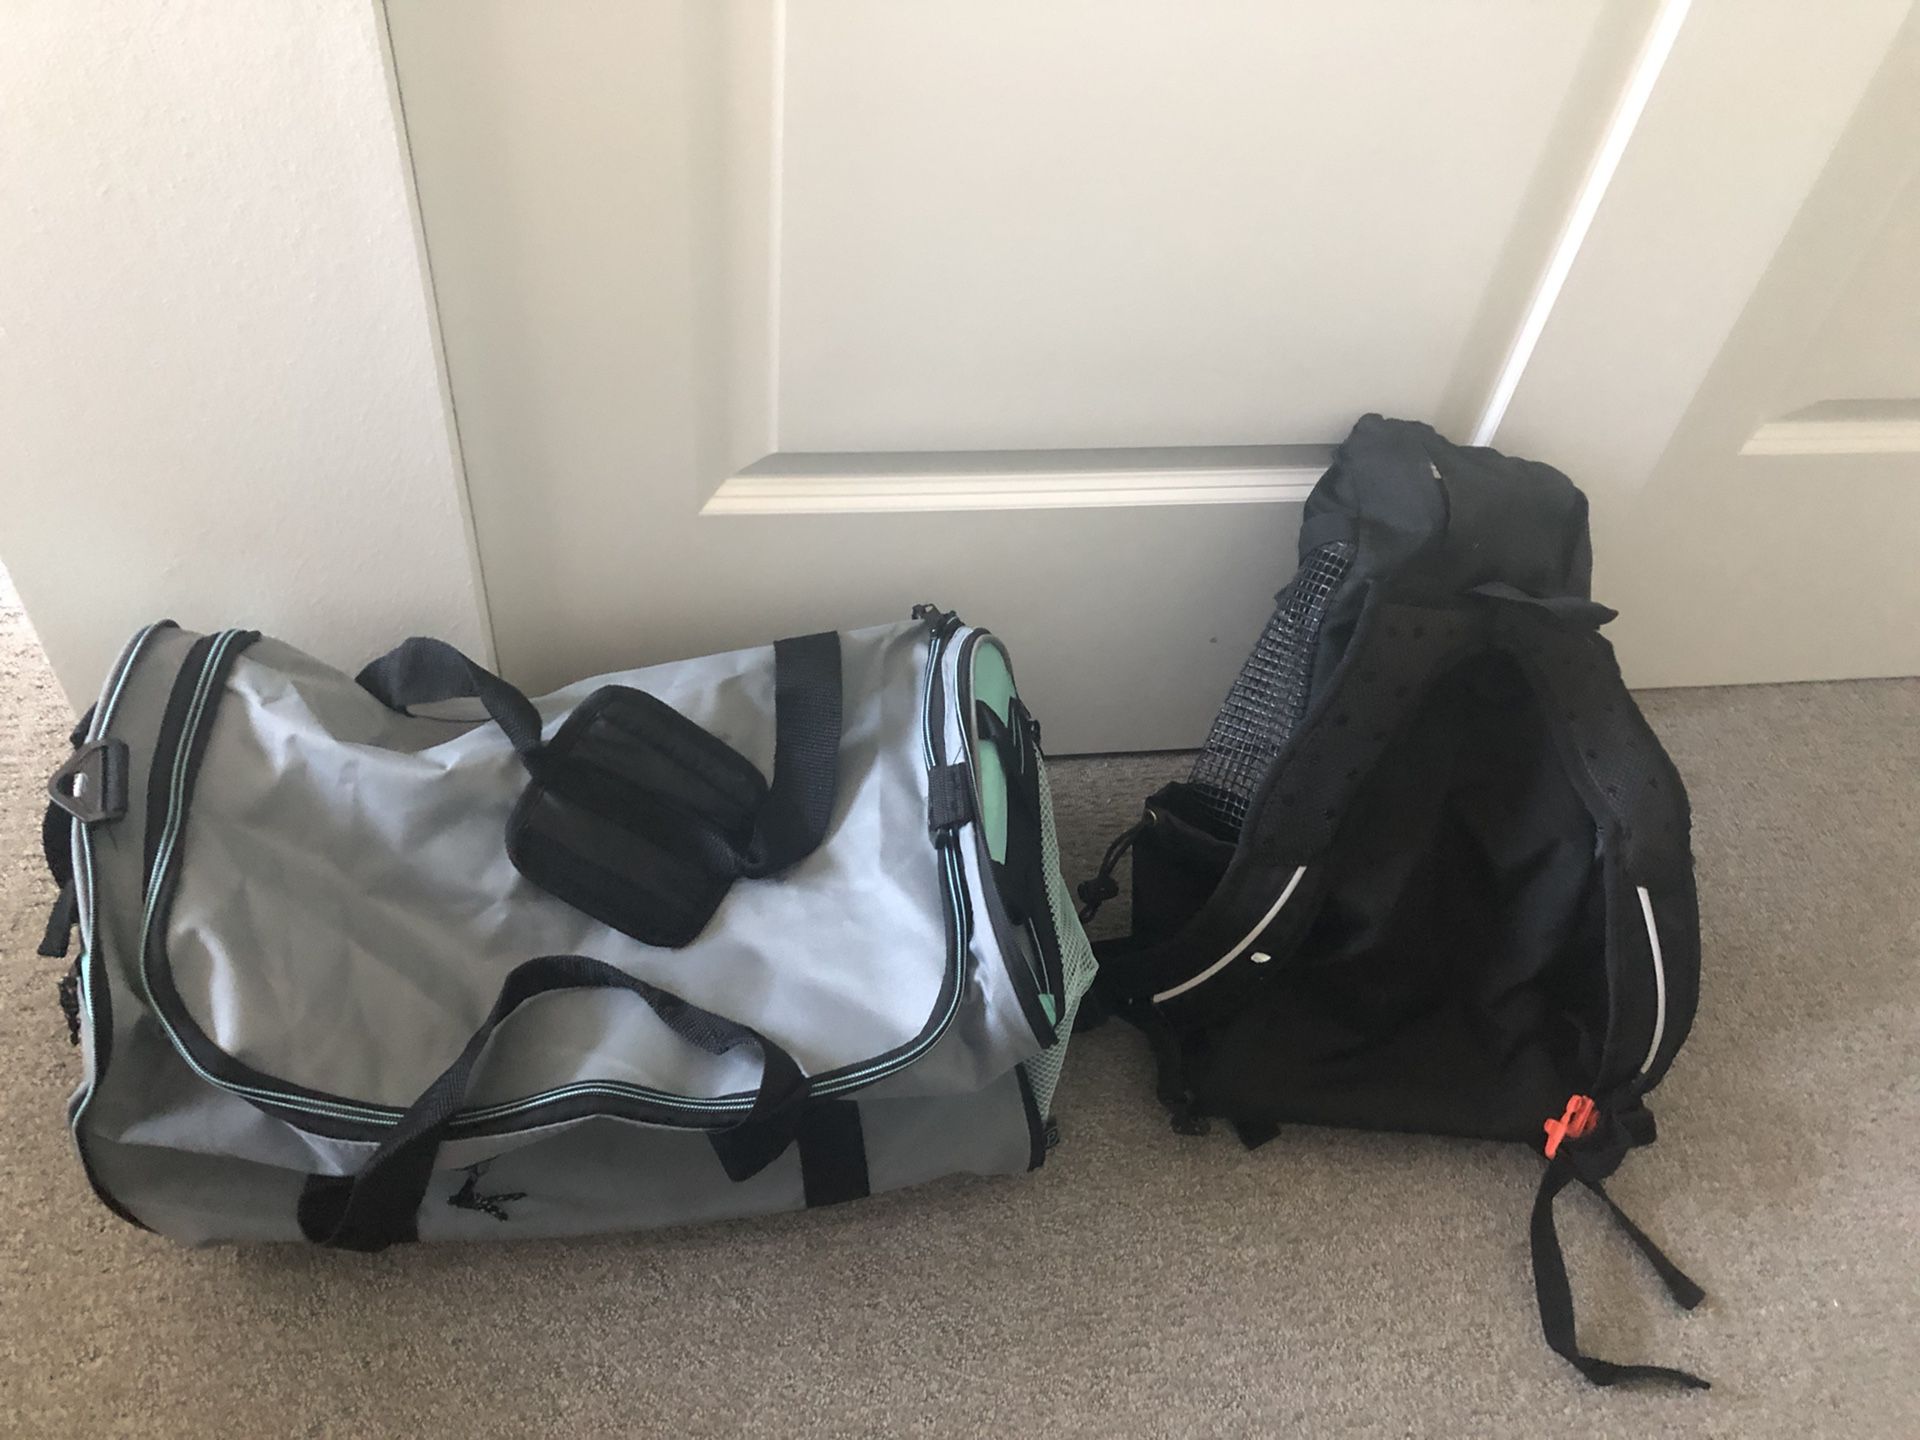 sports bag and backpack, all for $15